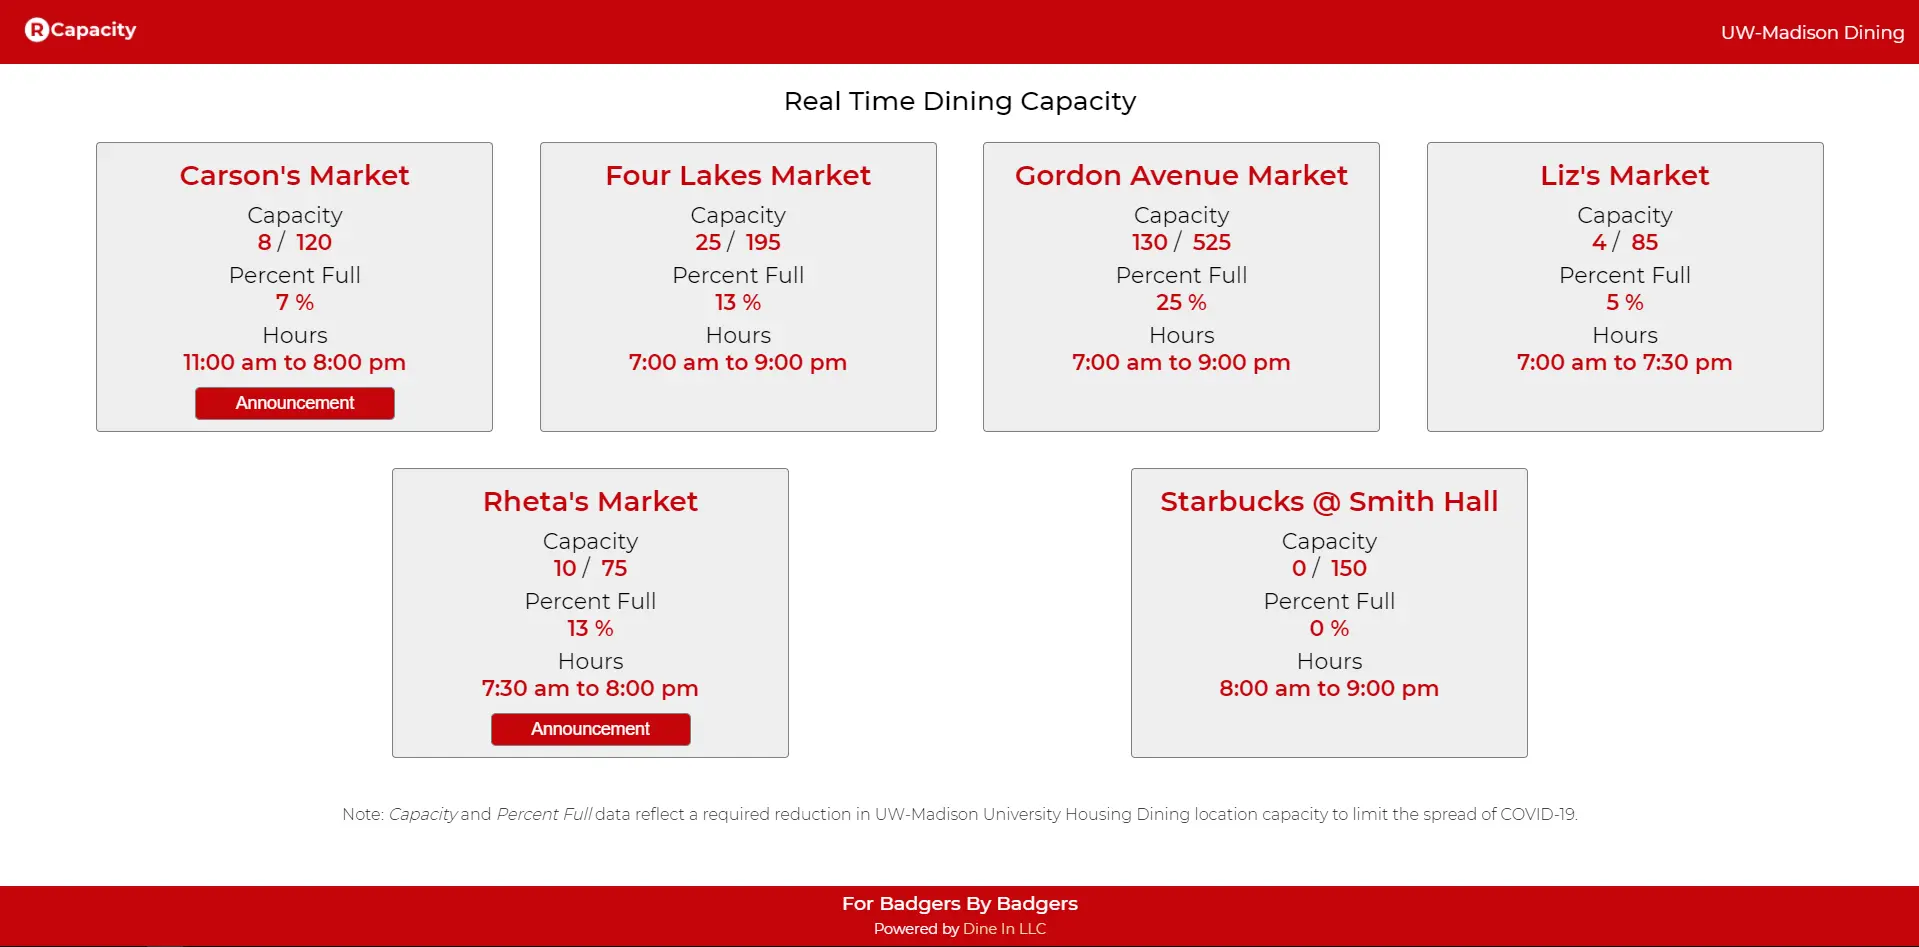 Real Time Dining Capacity